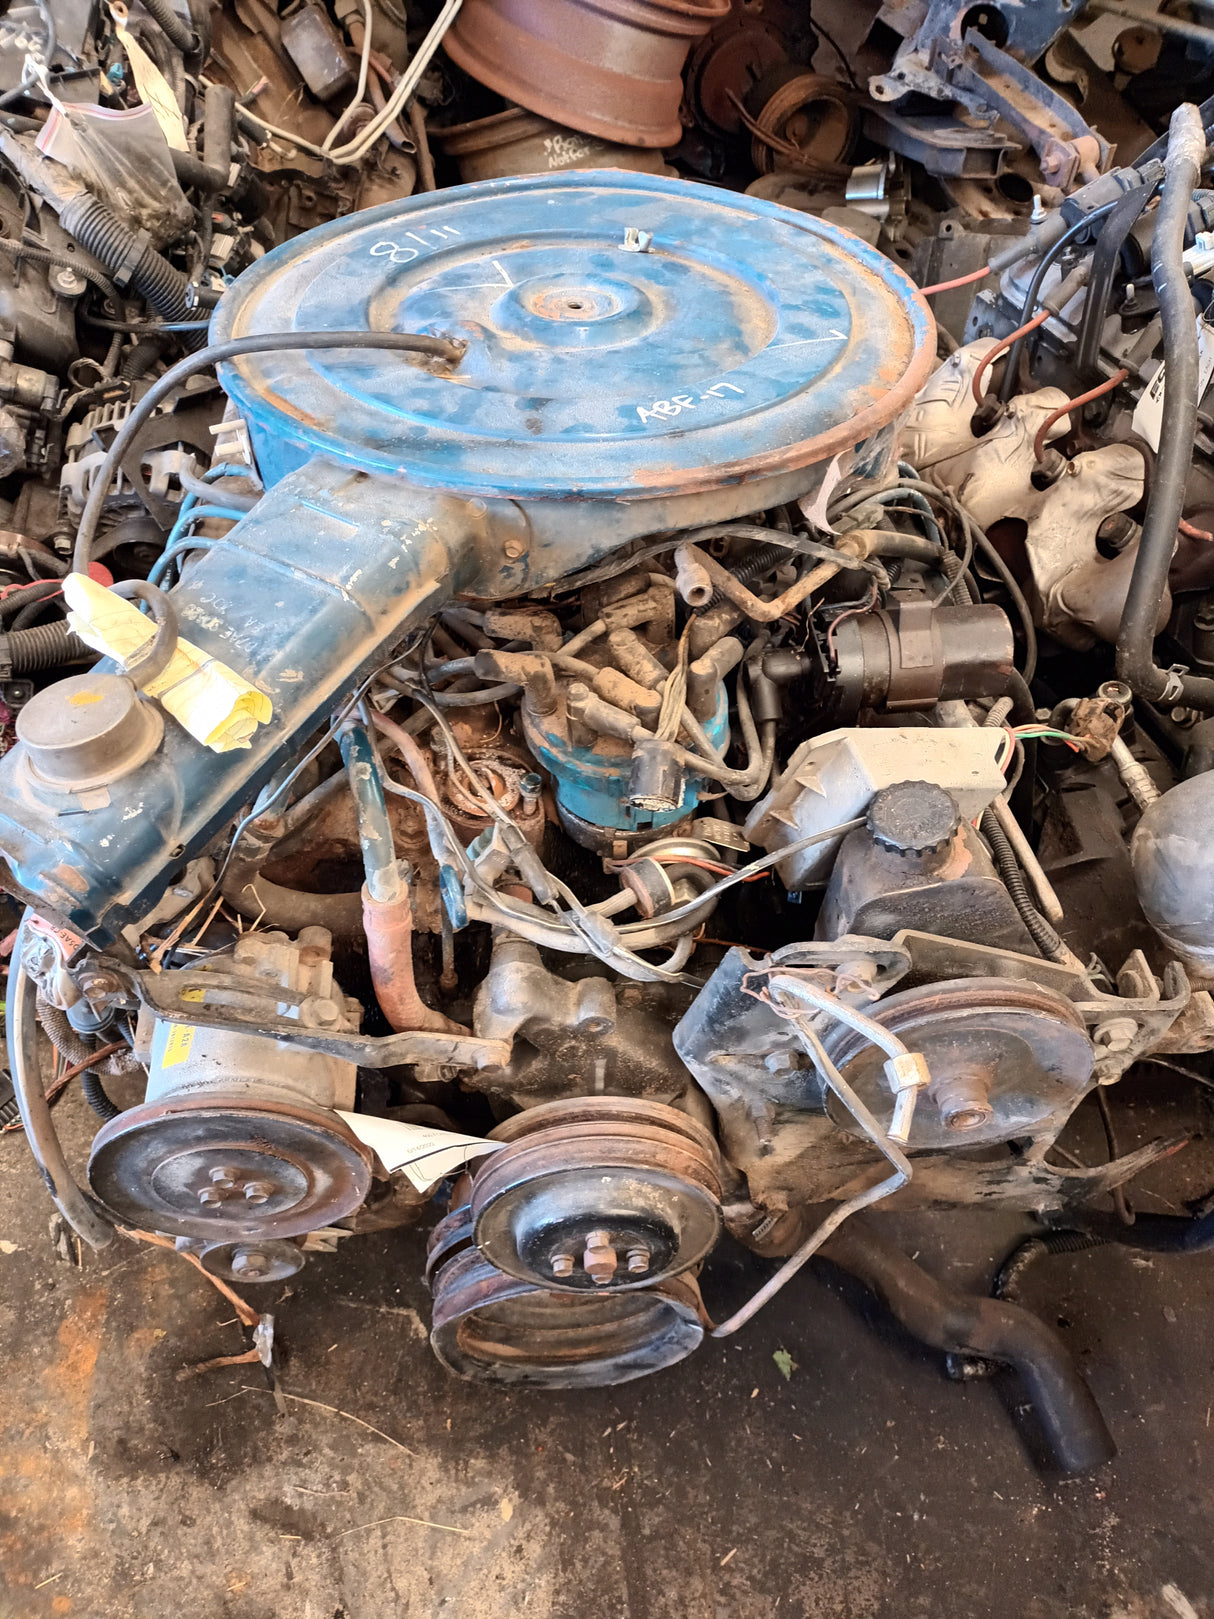 ENGINE FORD 460 BB USED CONDITION GOOD FOR REBUILDING